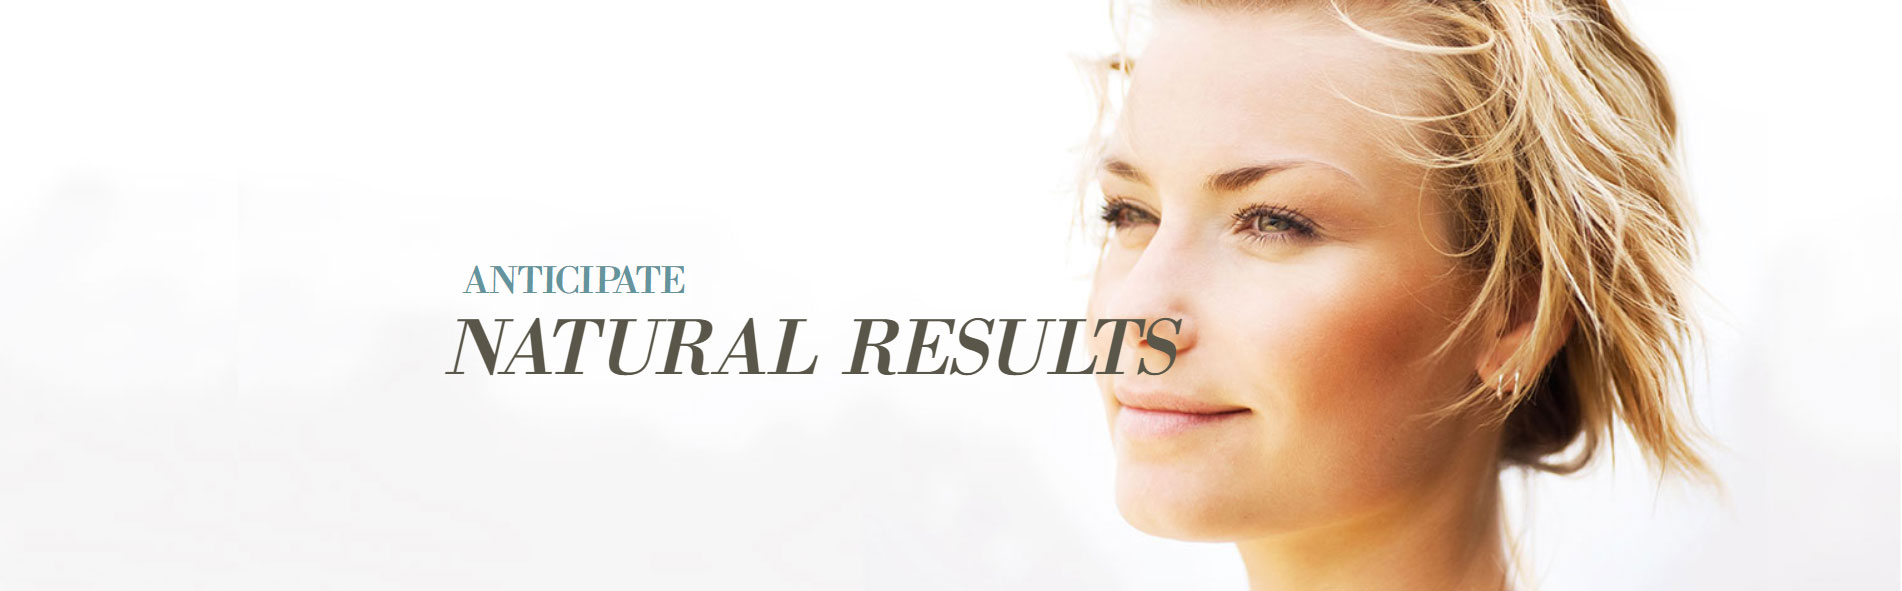 Natural results banner